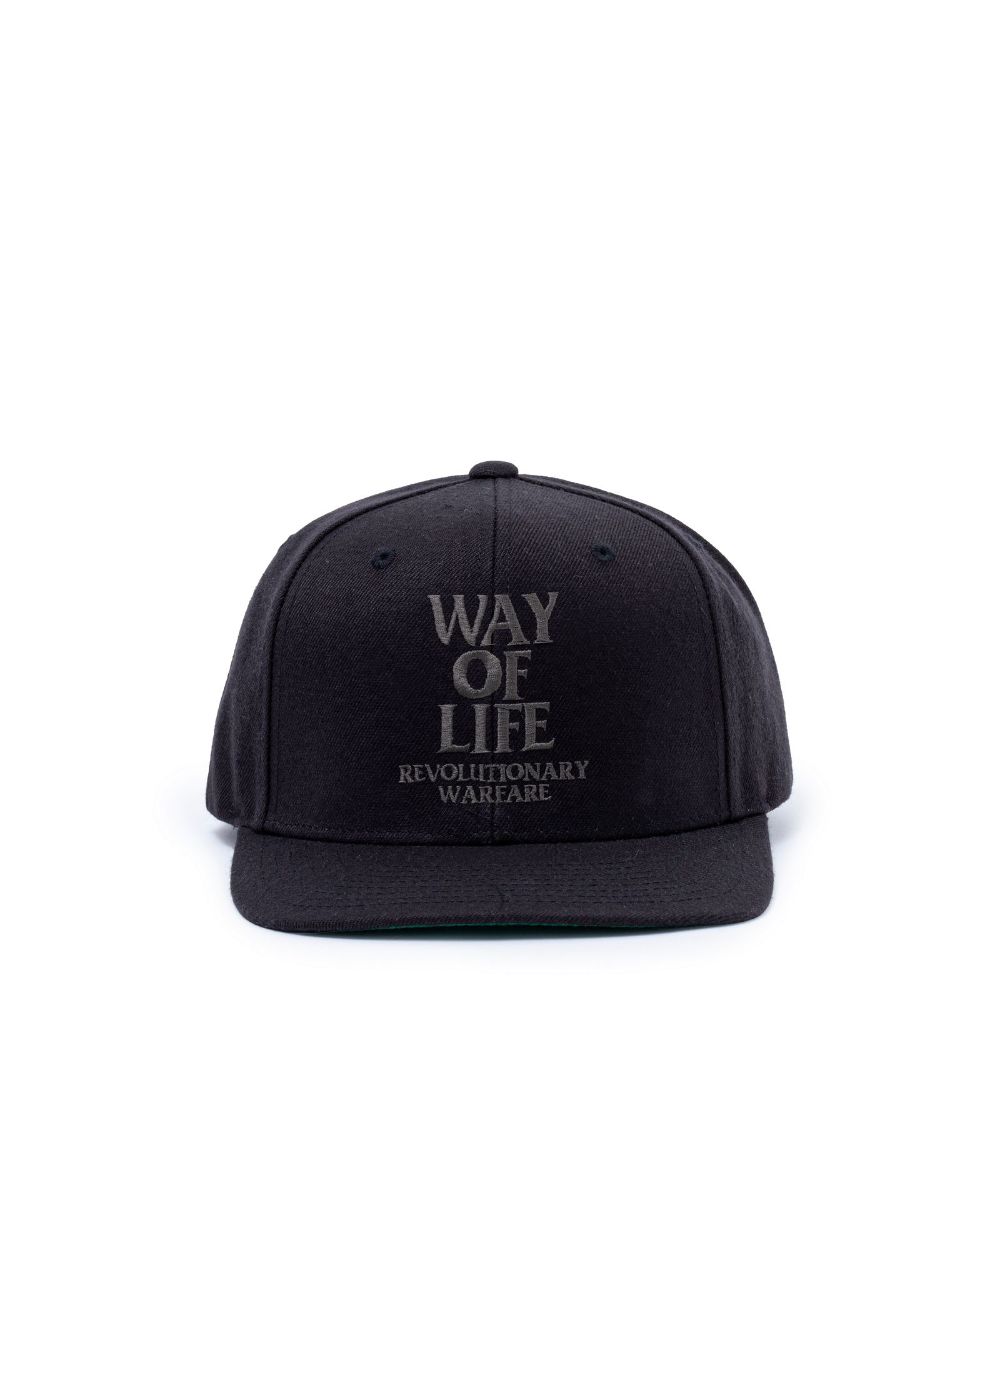 RATS EMBROIDERY CAP WAY OF LIFE GOLD 新品